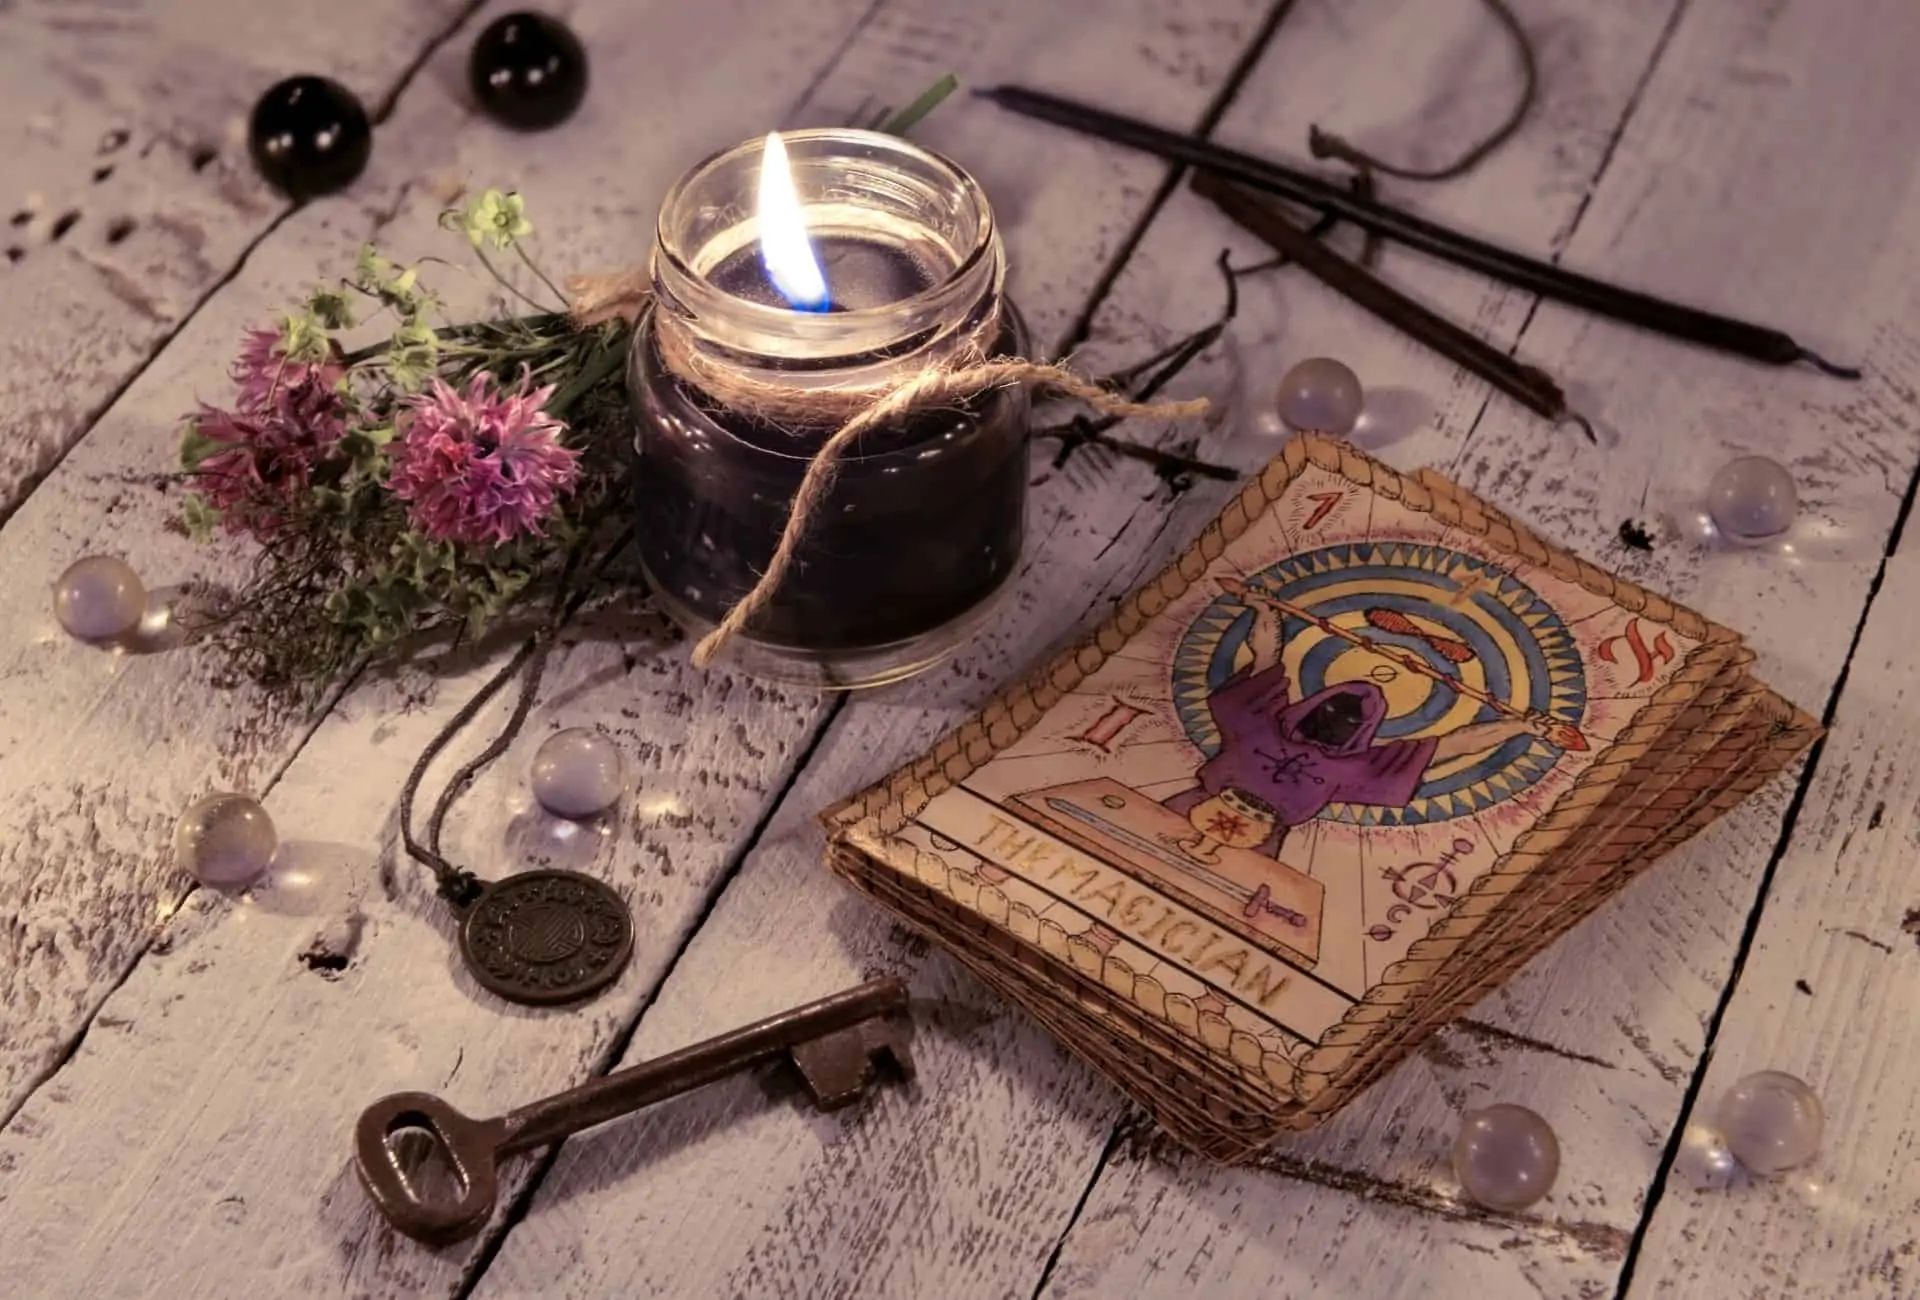 Witchy table with candle and tarot cards.